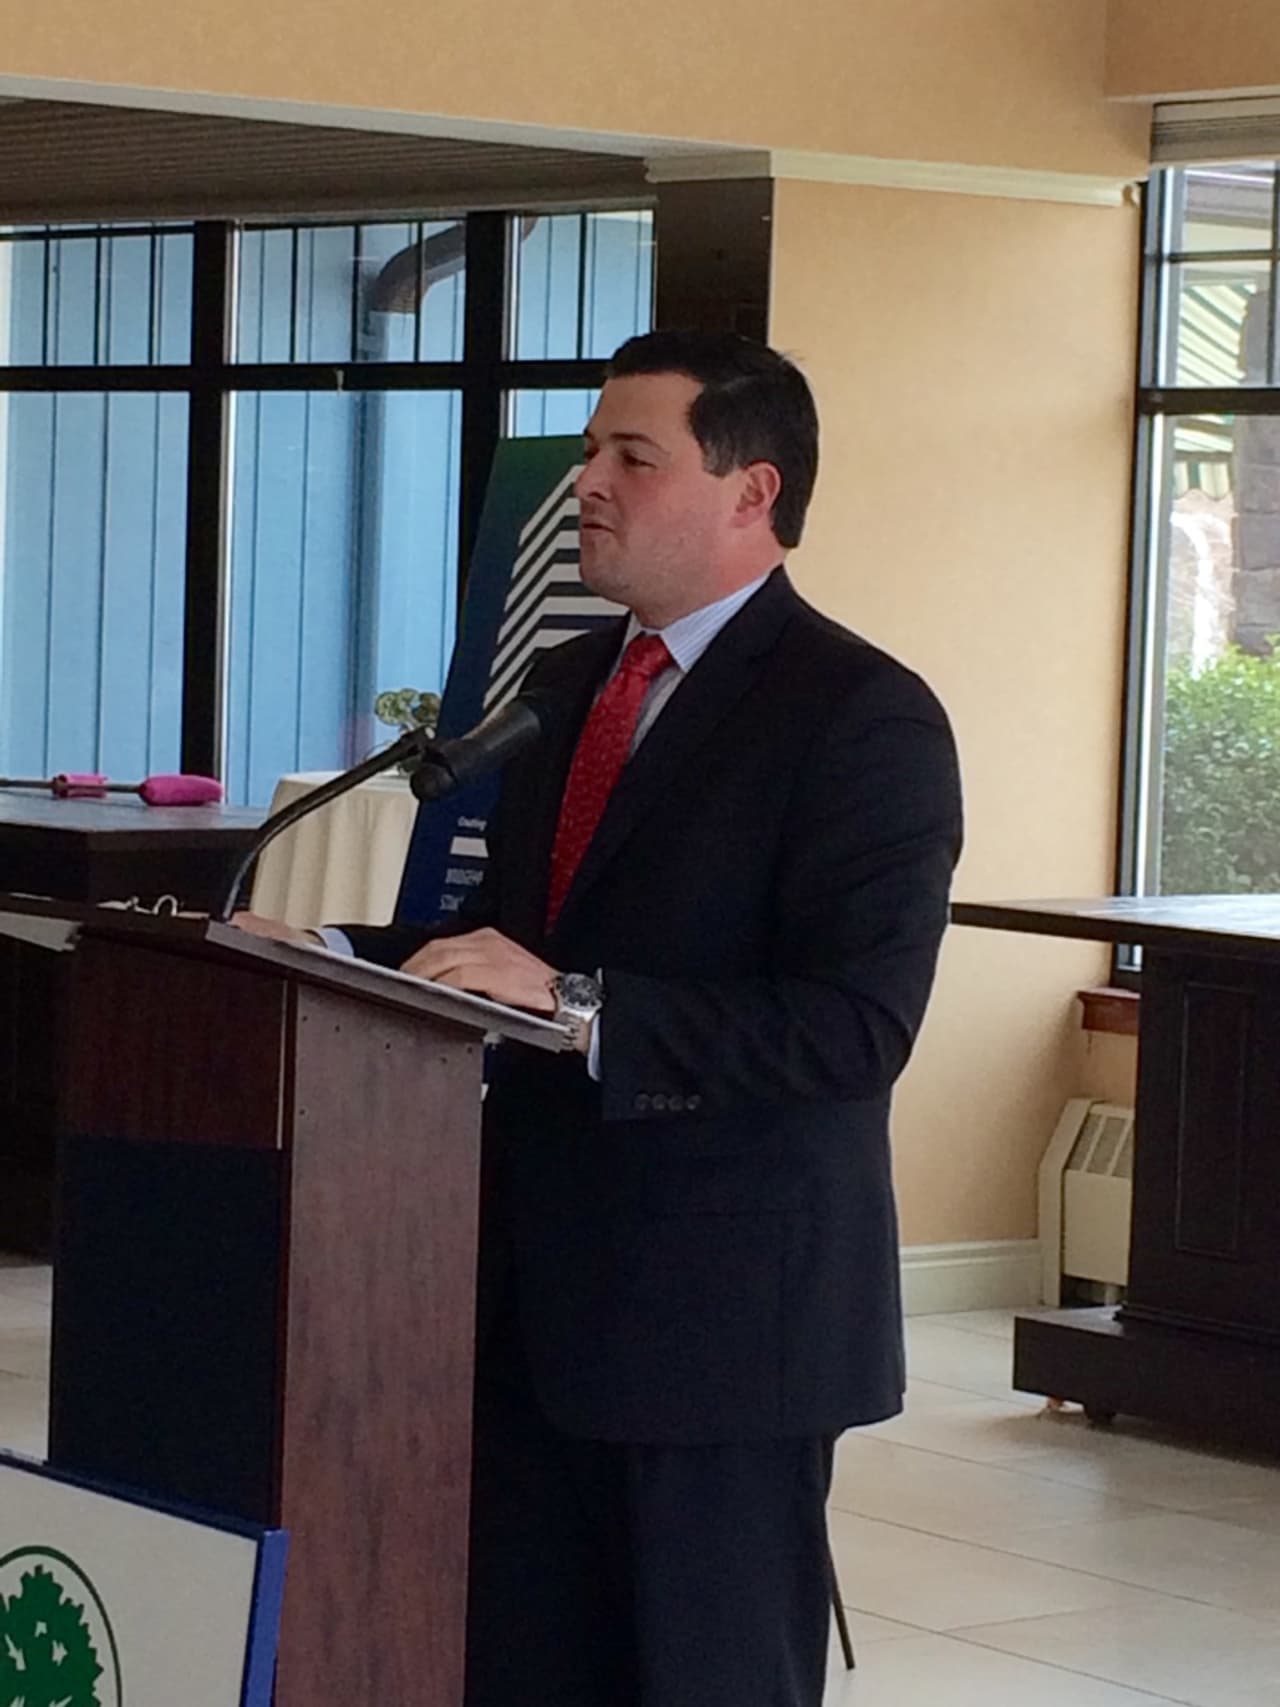 First Selectman Tim Herbst delivered the news of the pending acquisitions.